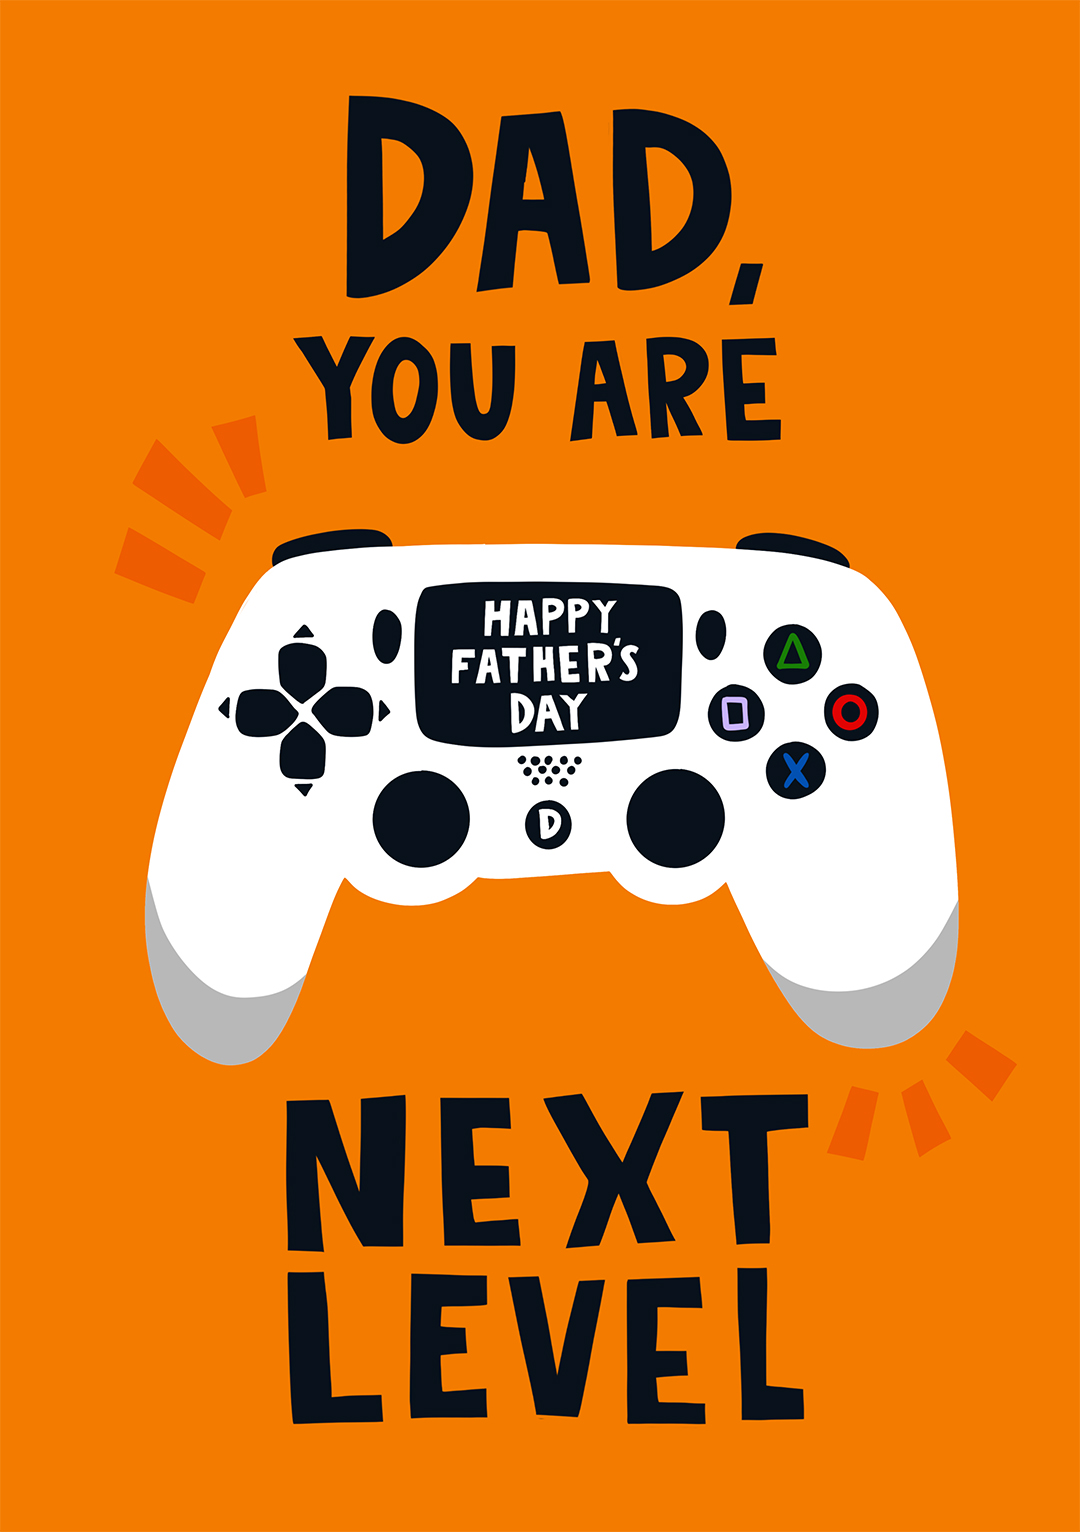 Dad, You Are Next Level - Father's Day Card